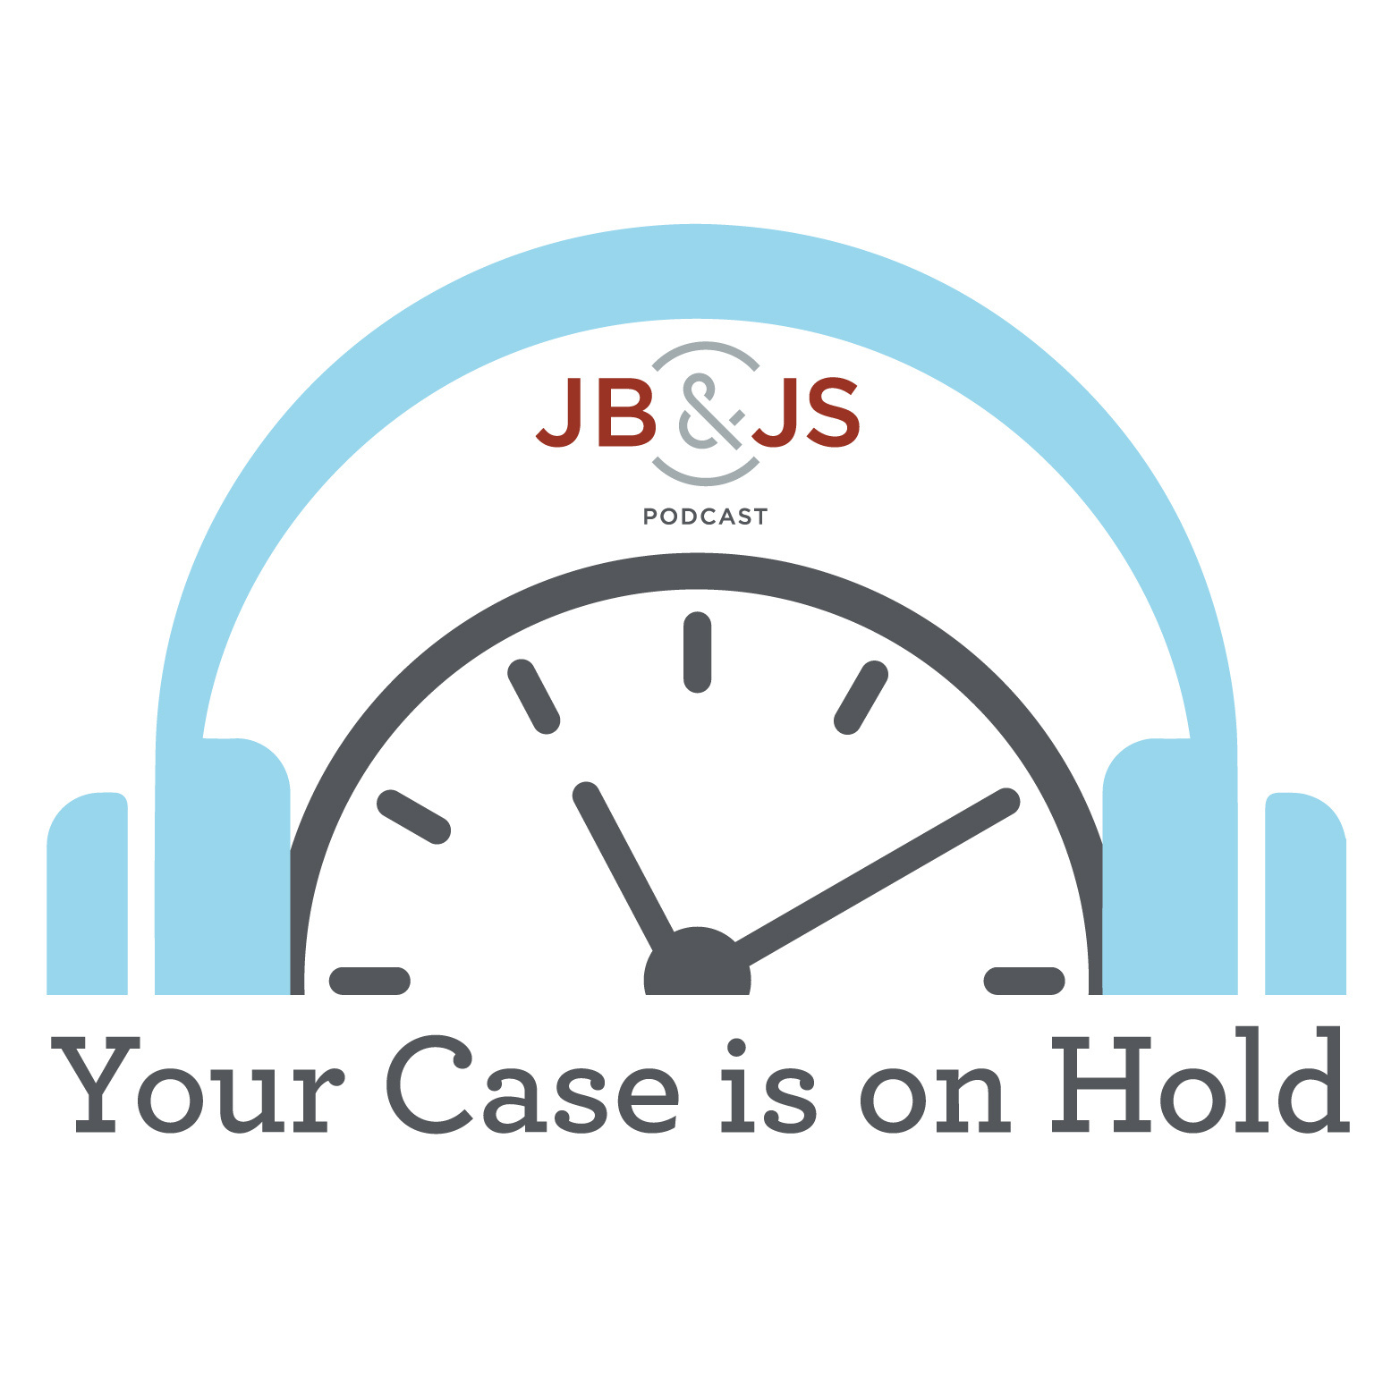 Inaugural Episode: Your Case Is On Hold, with Antonia Chen and Andrew Schoenfeld